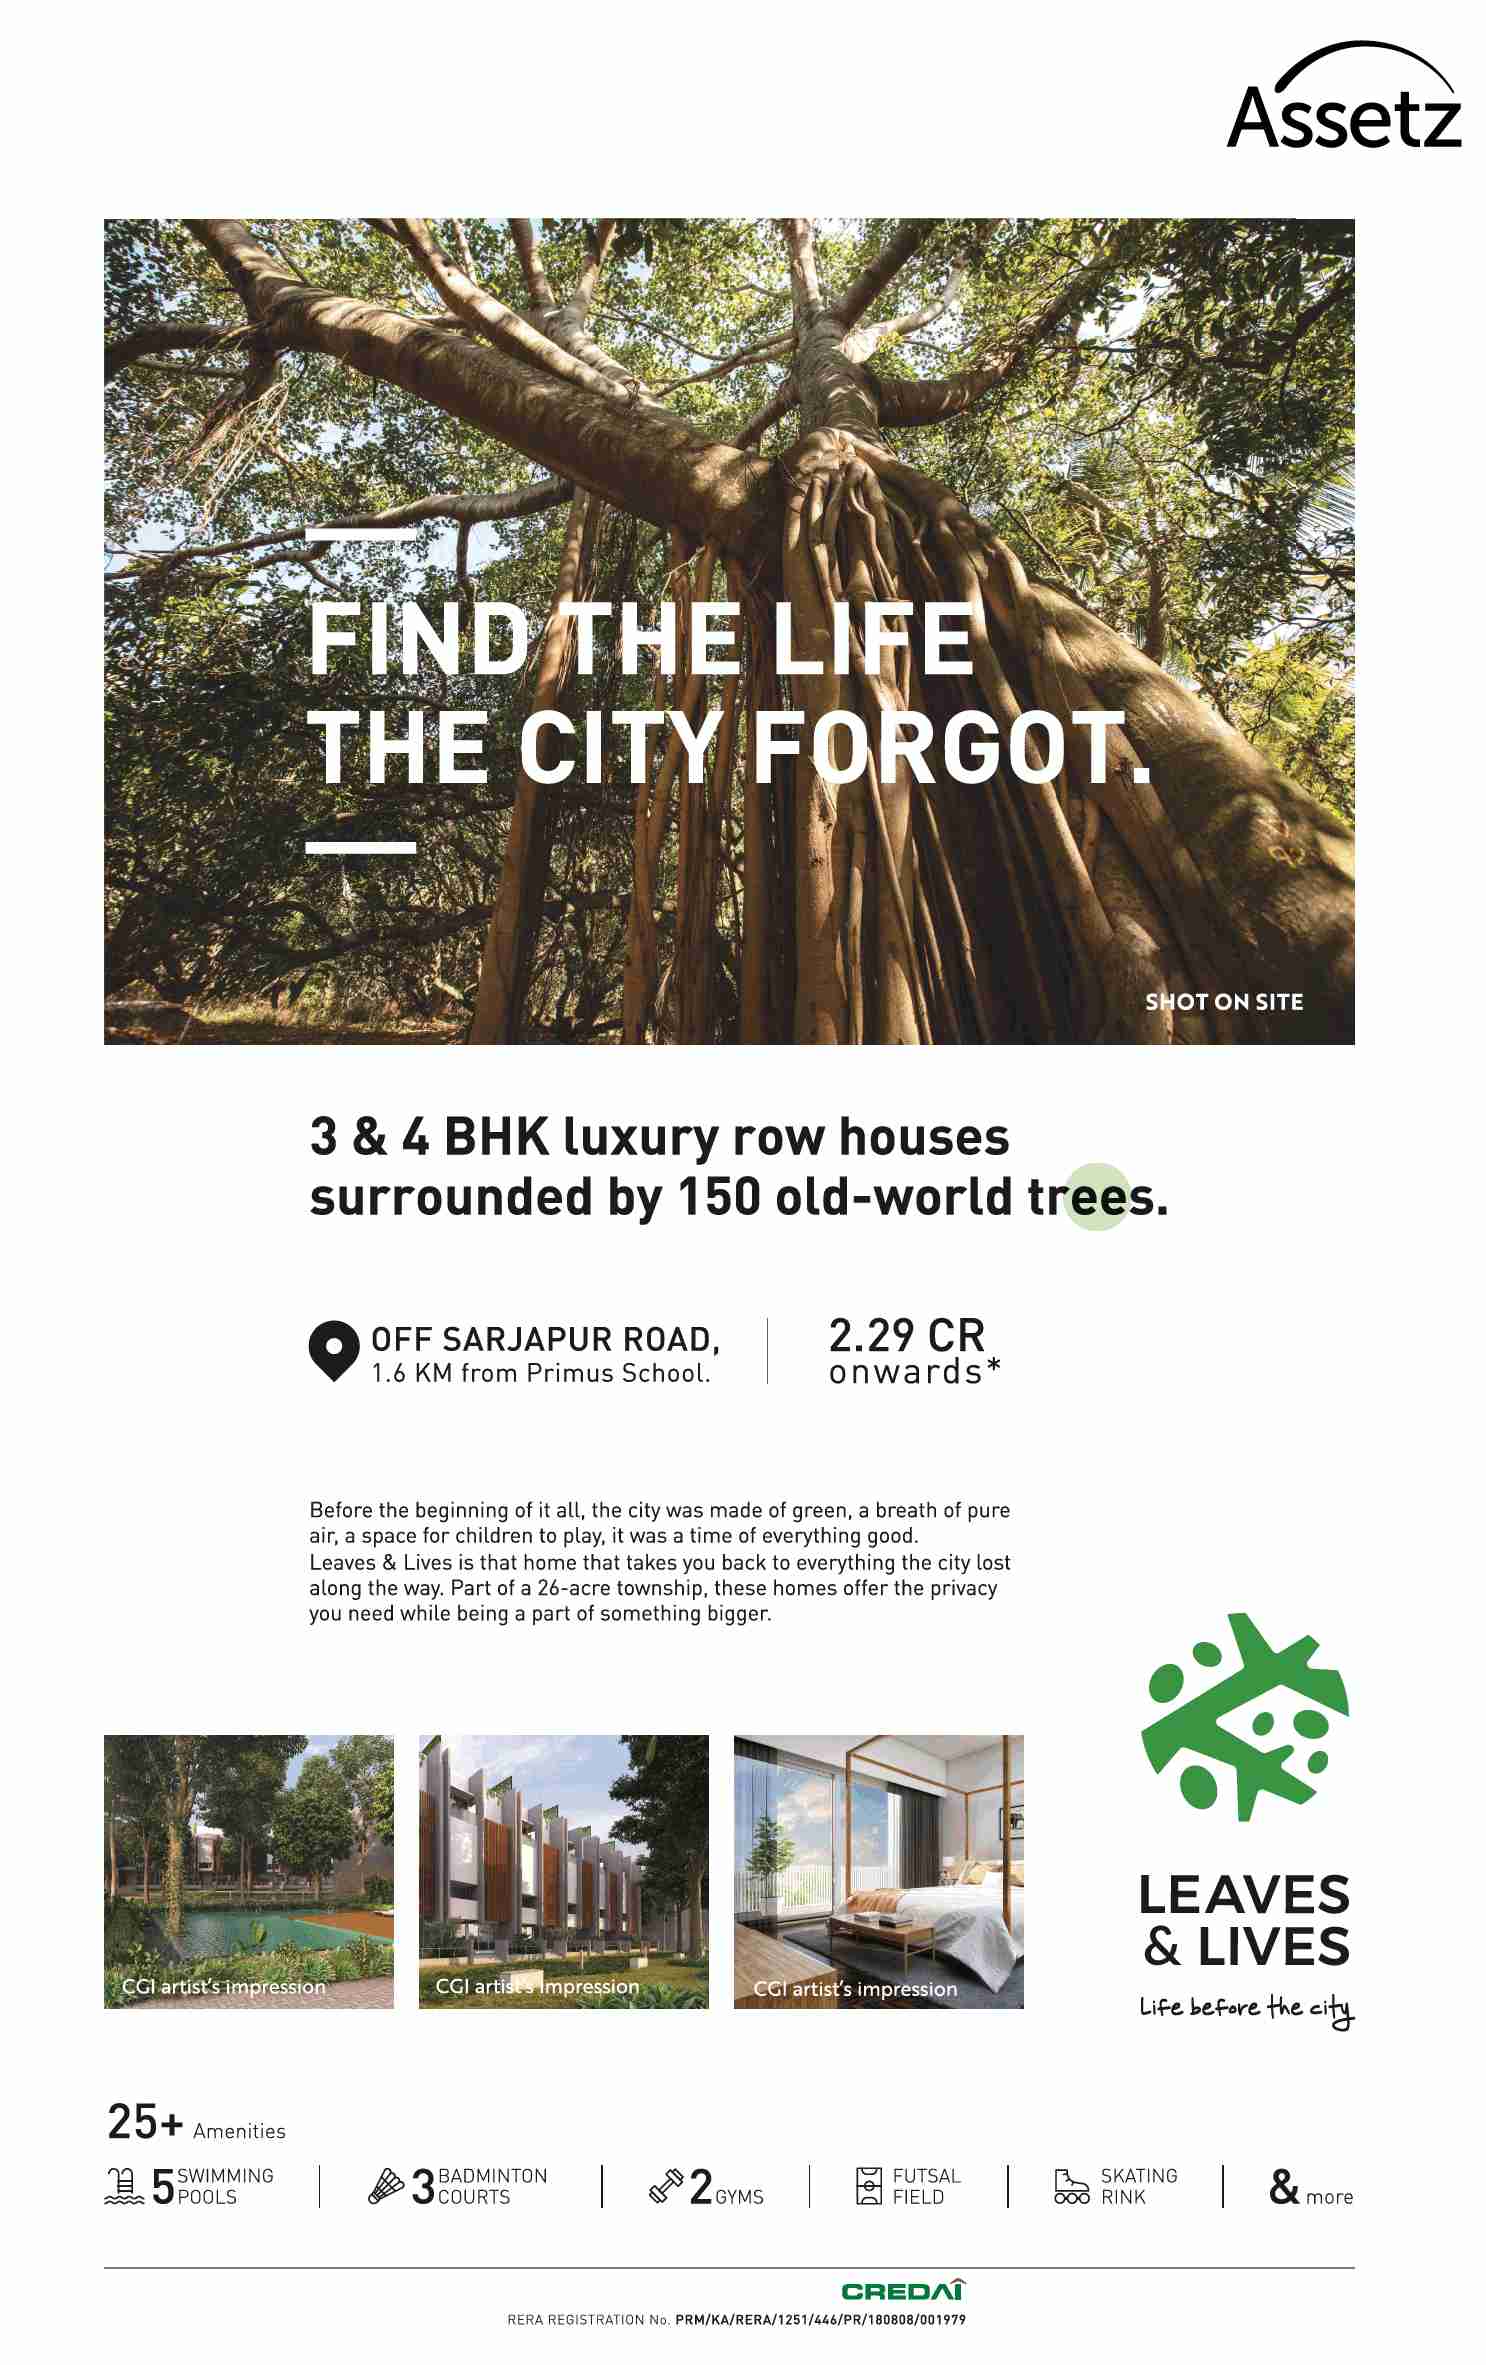 Book luxury row houses starting @ Rs. 2.29 cr. at Assetz Leaves And Lives in Bangalore Update